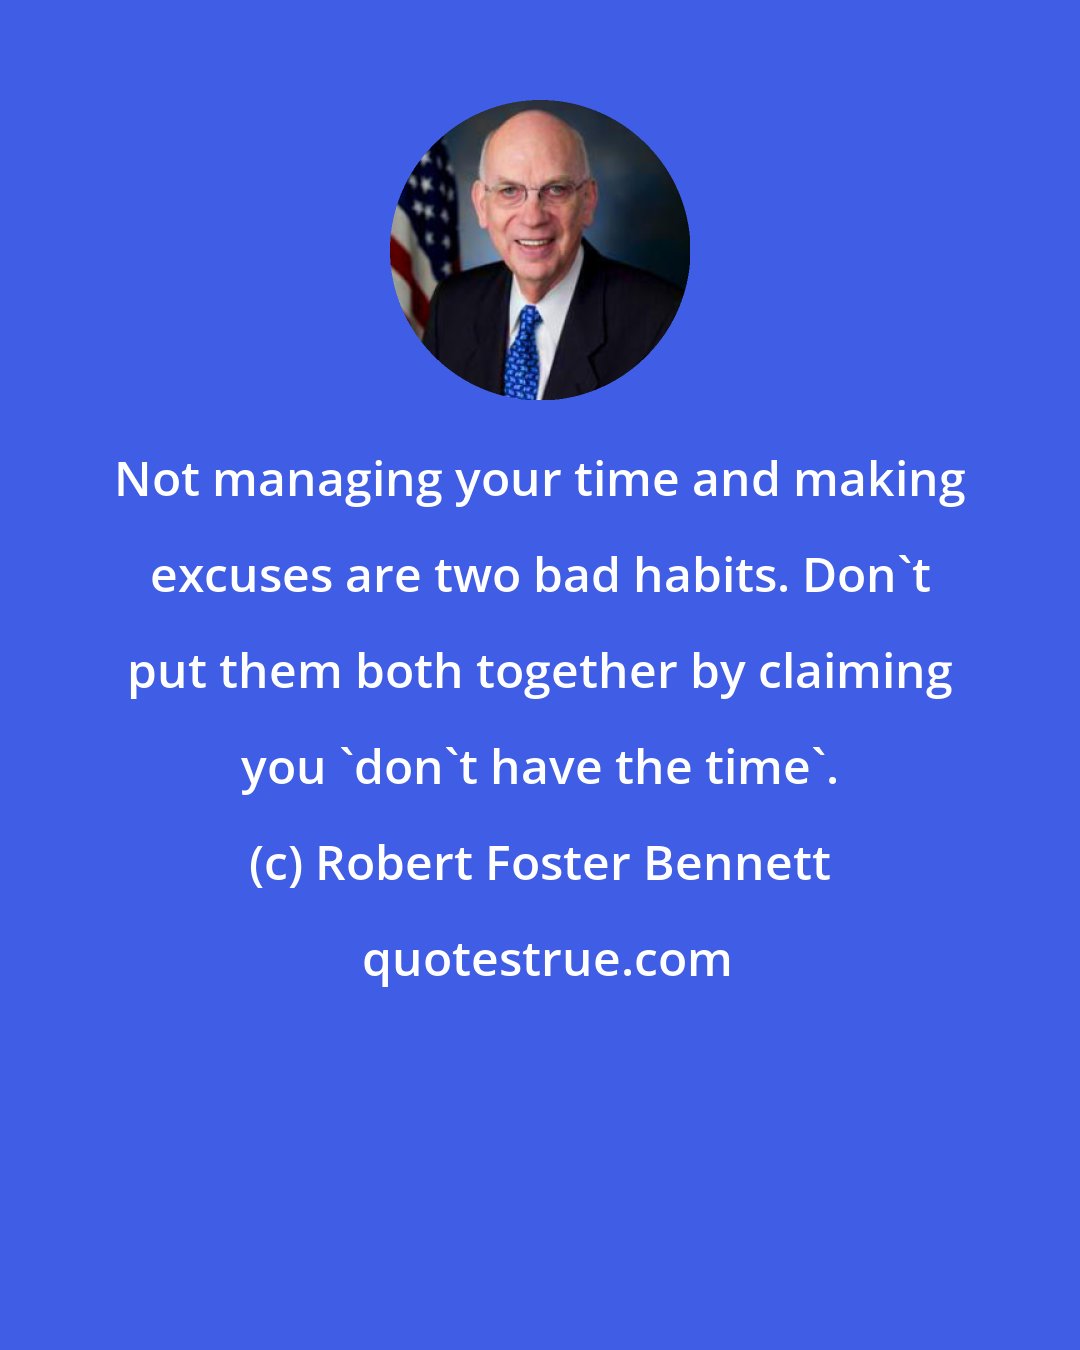 Robert Foster Bennett: Not managing your time and making excuses are two bad habits. Don't put them both together by claiming you 'don't have the time'.